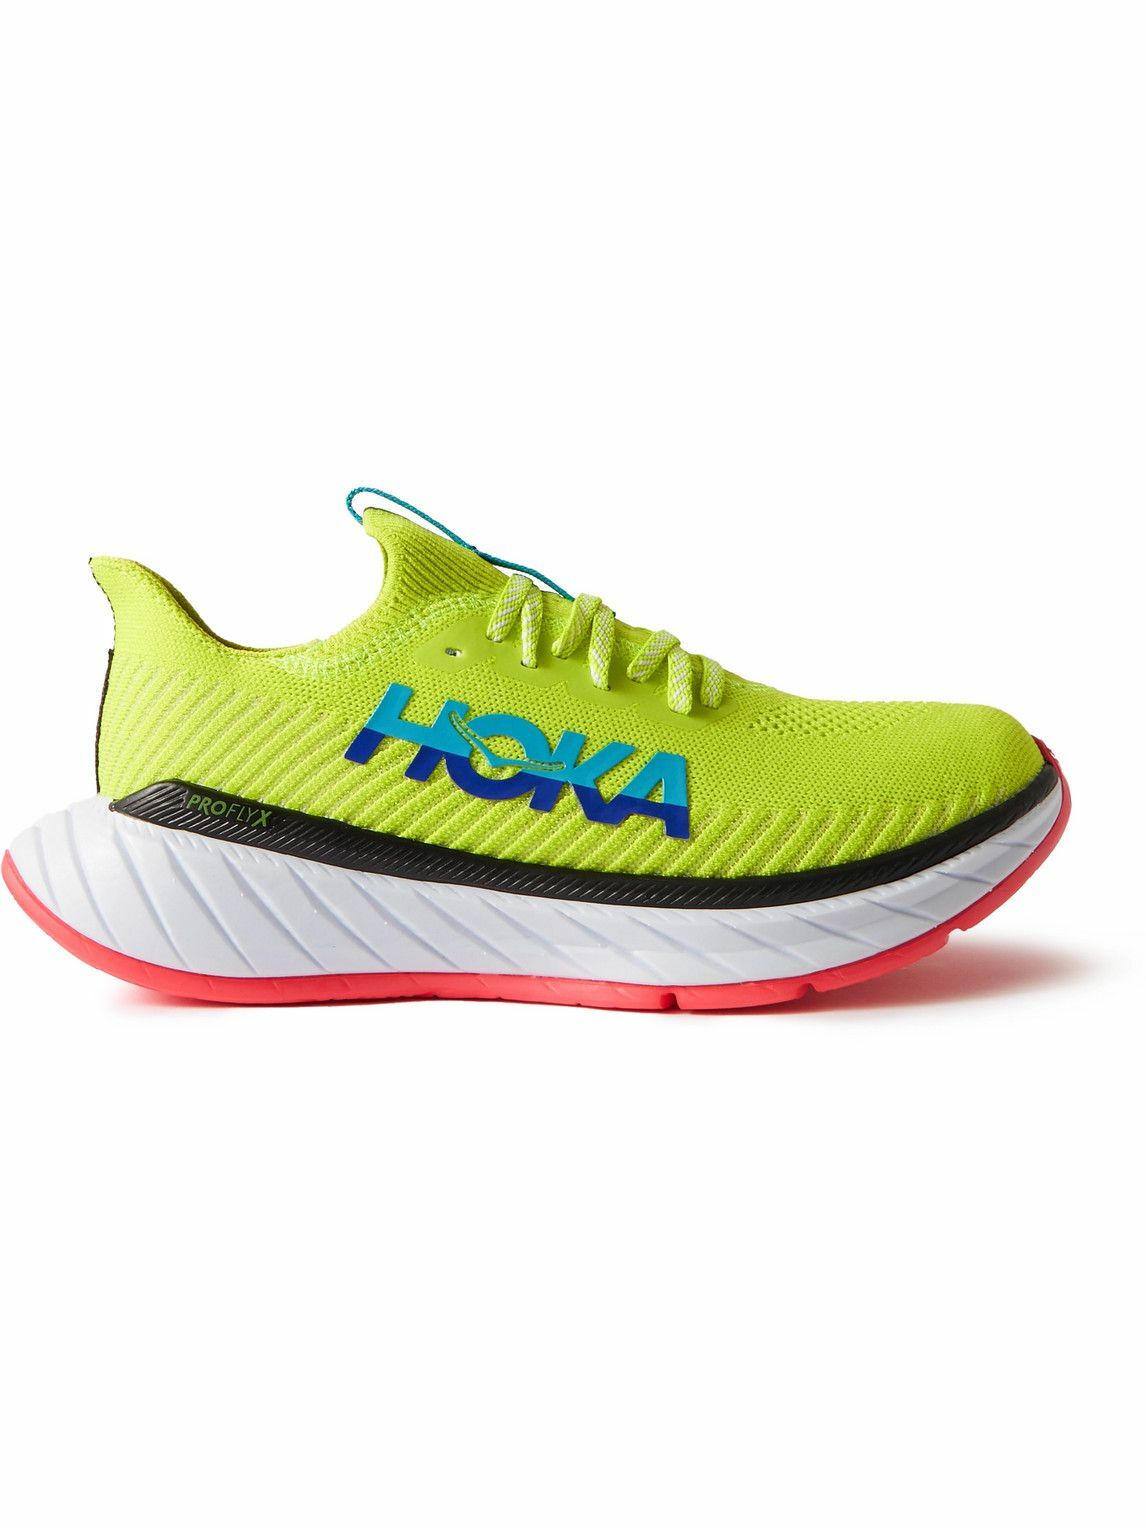 Hoka One One - Carbon X3 Rubber-Trimmed Mesh Running Sneakers - Green ...